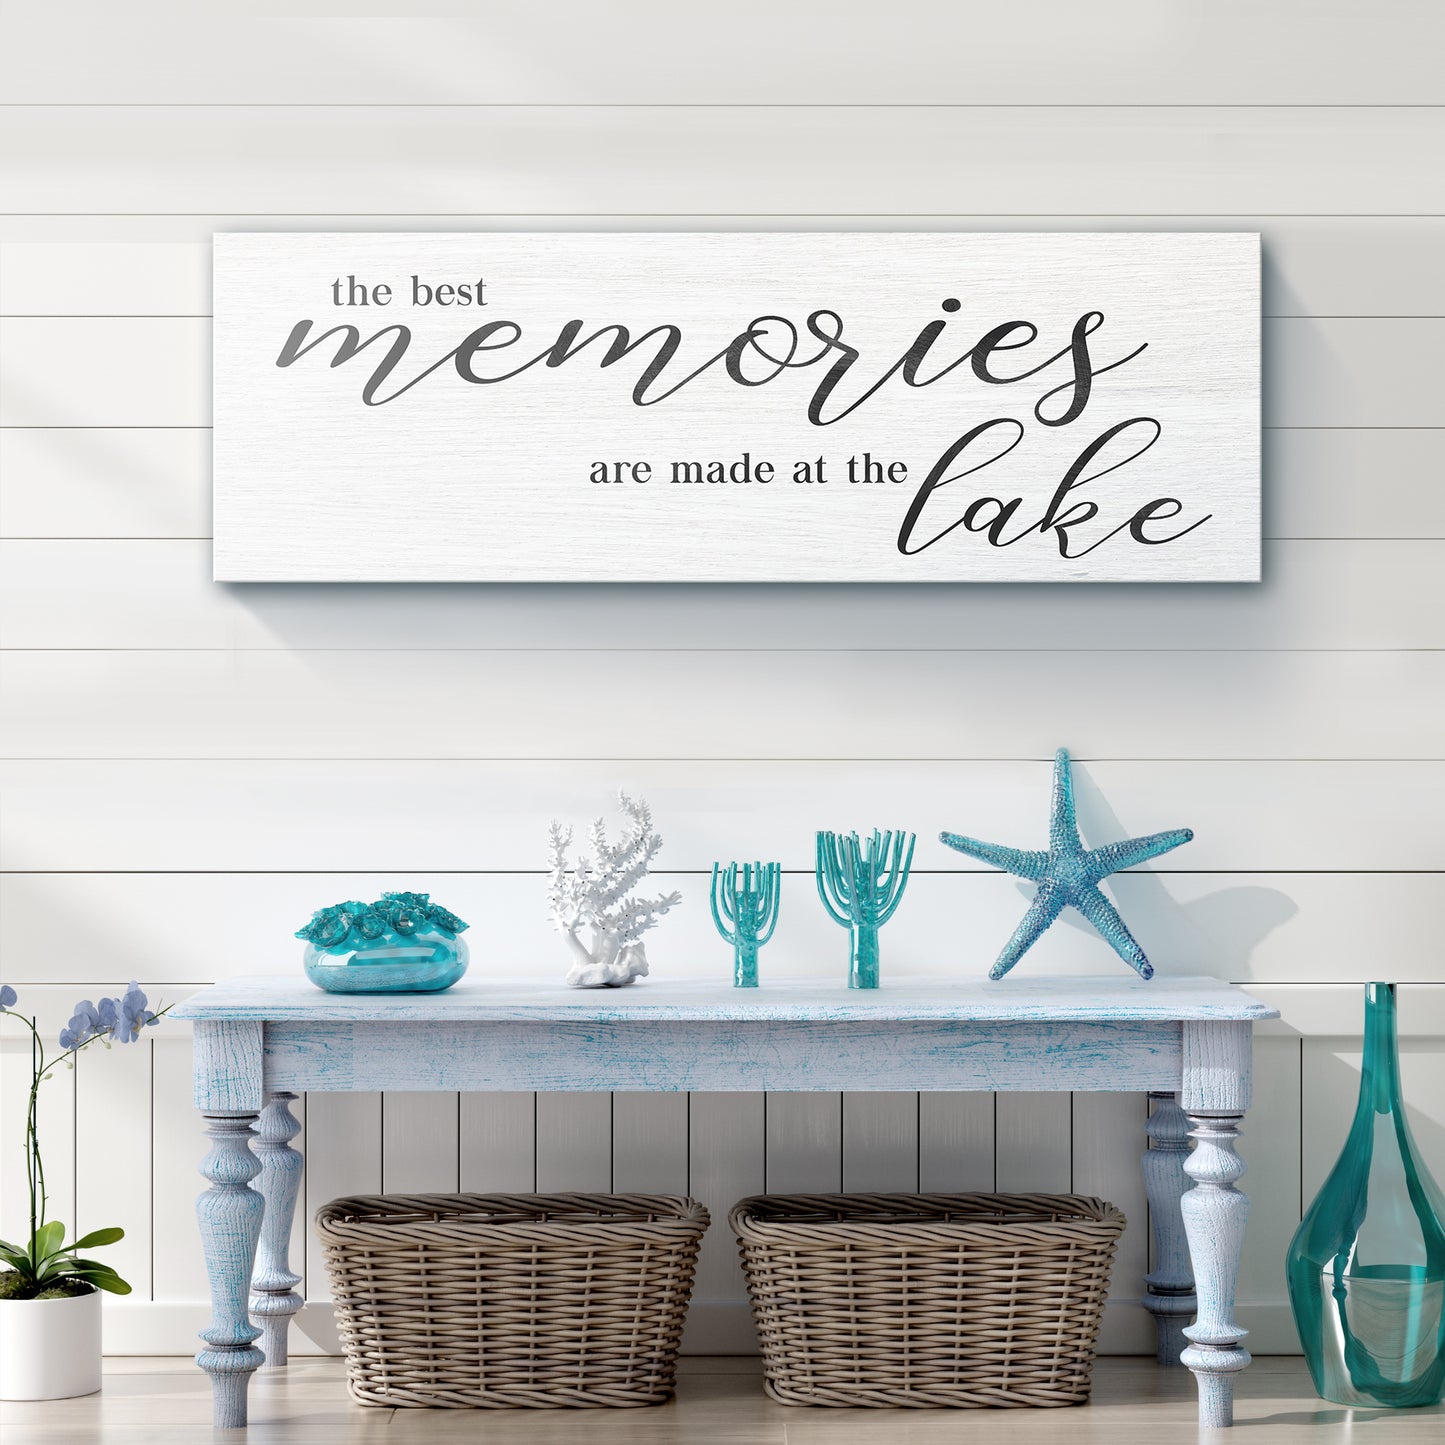 Best Memories At The Lake Sign - Image by Tailored Canvases